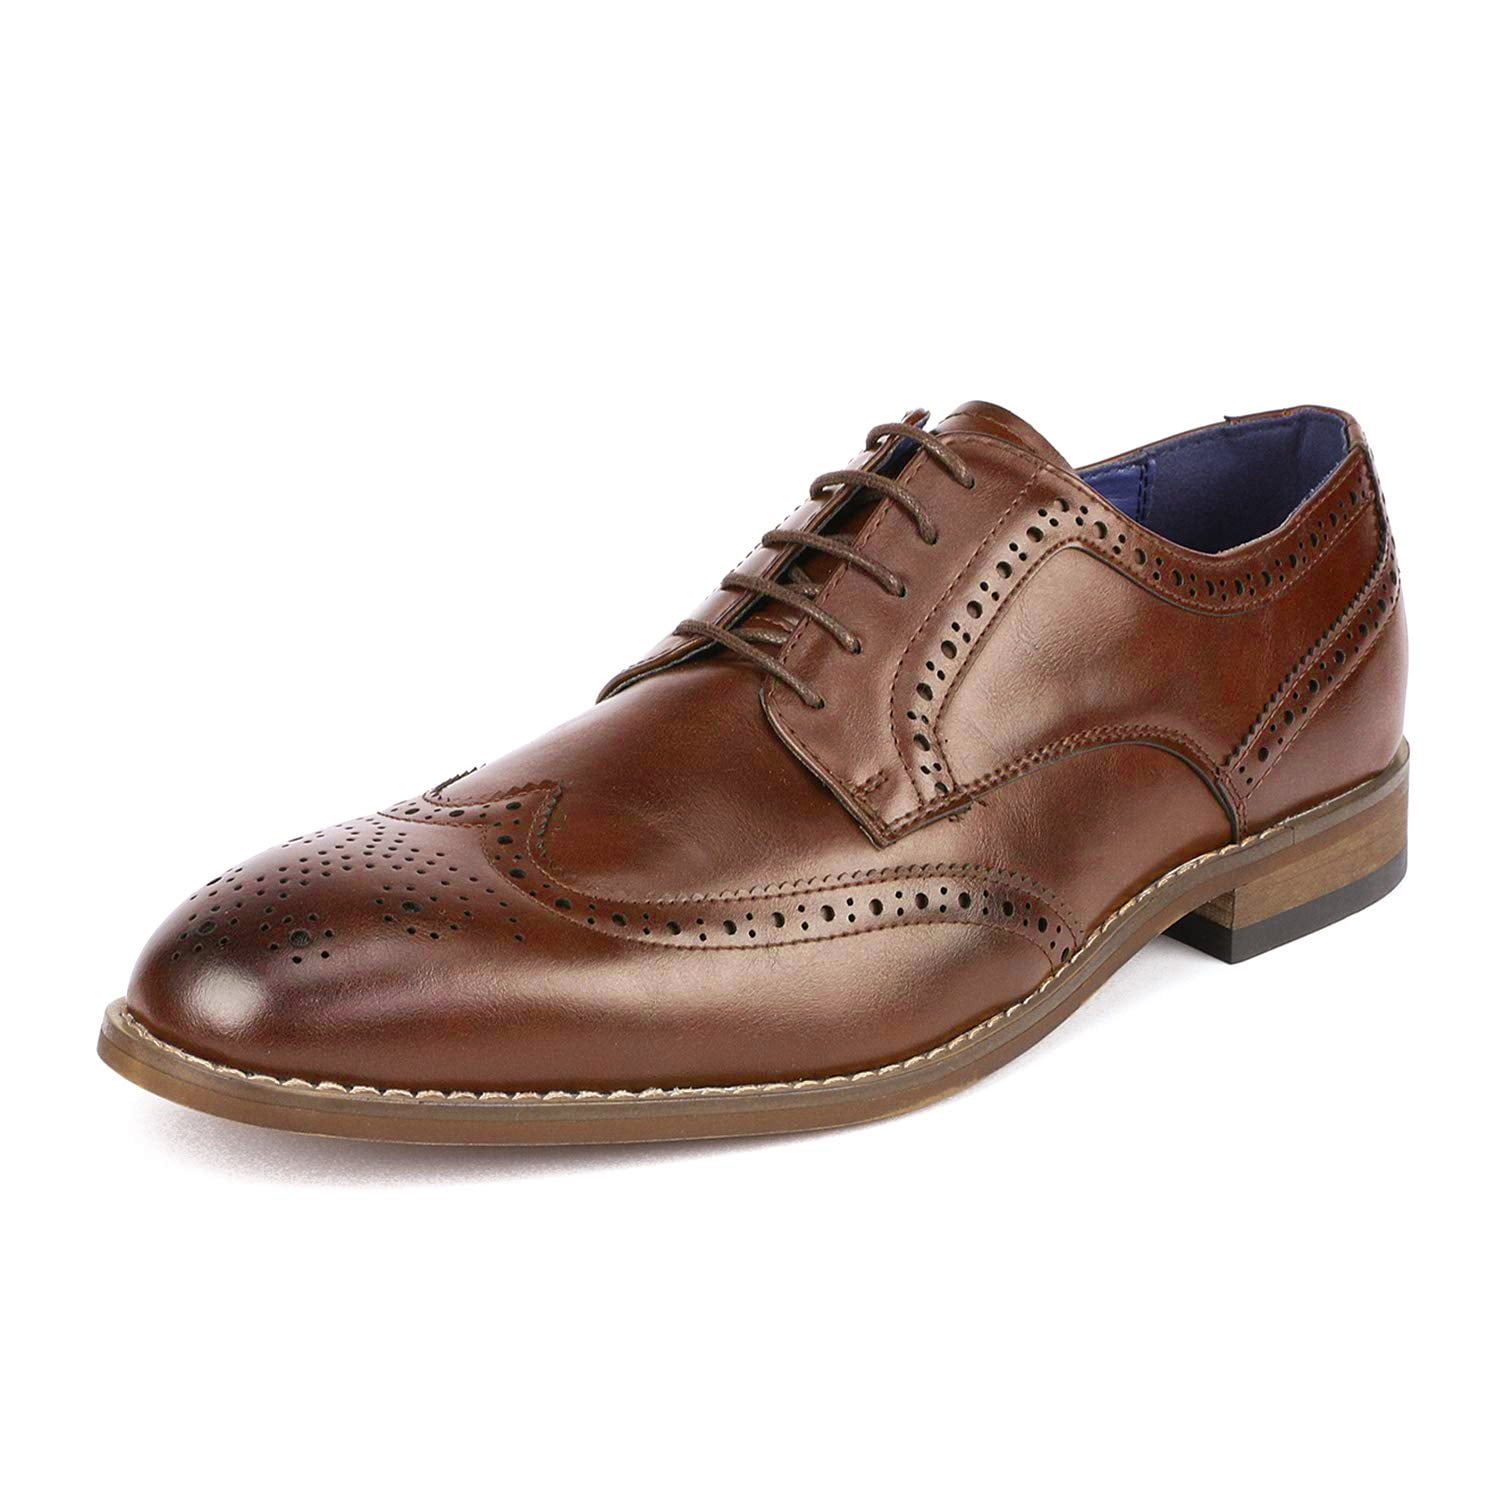 Bruno Marc Mens Brogue Oxford Shoes Lace up Wing Tip Dress Shoes Casual ...